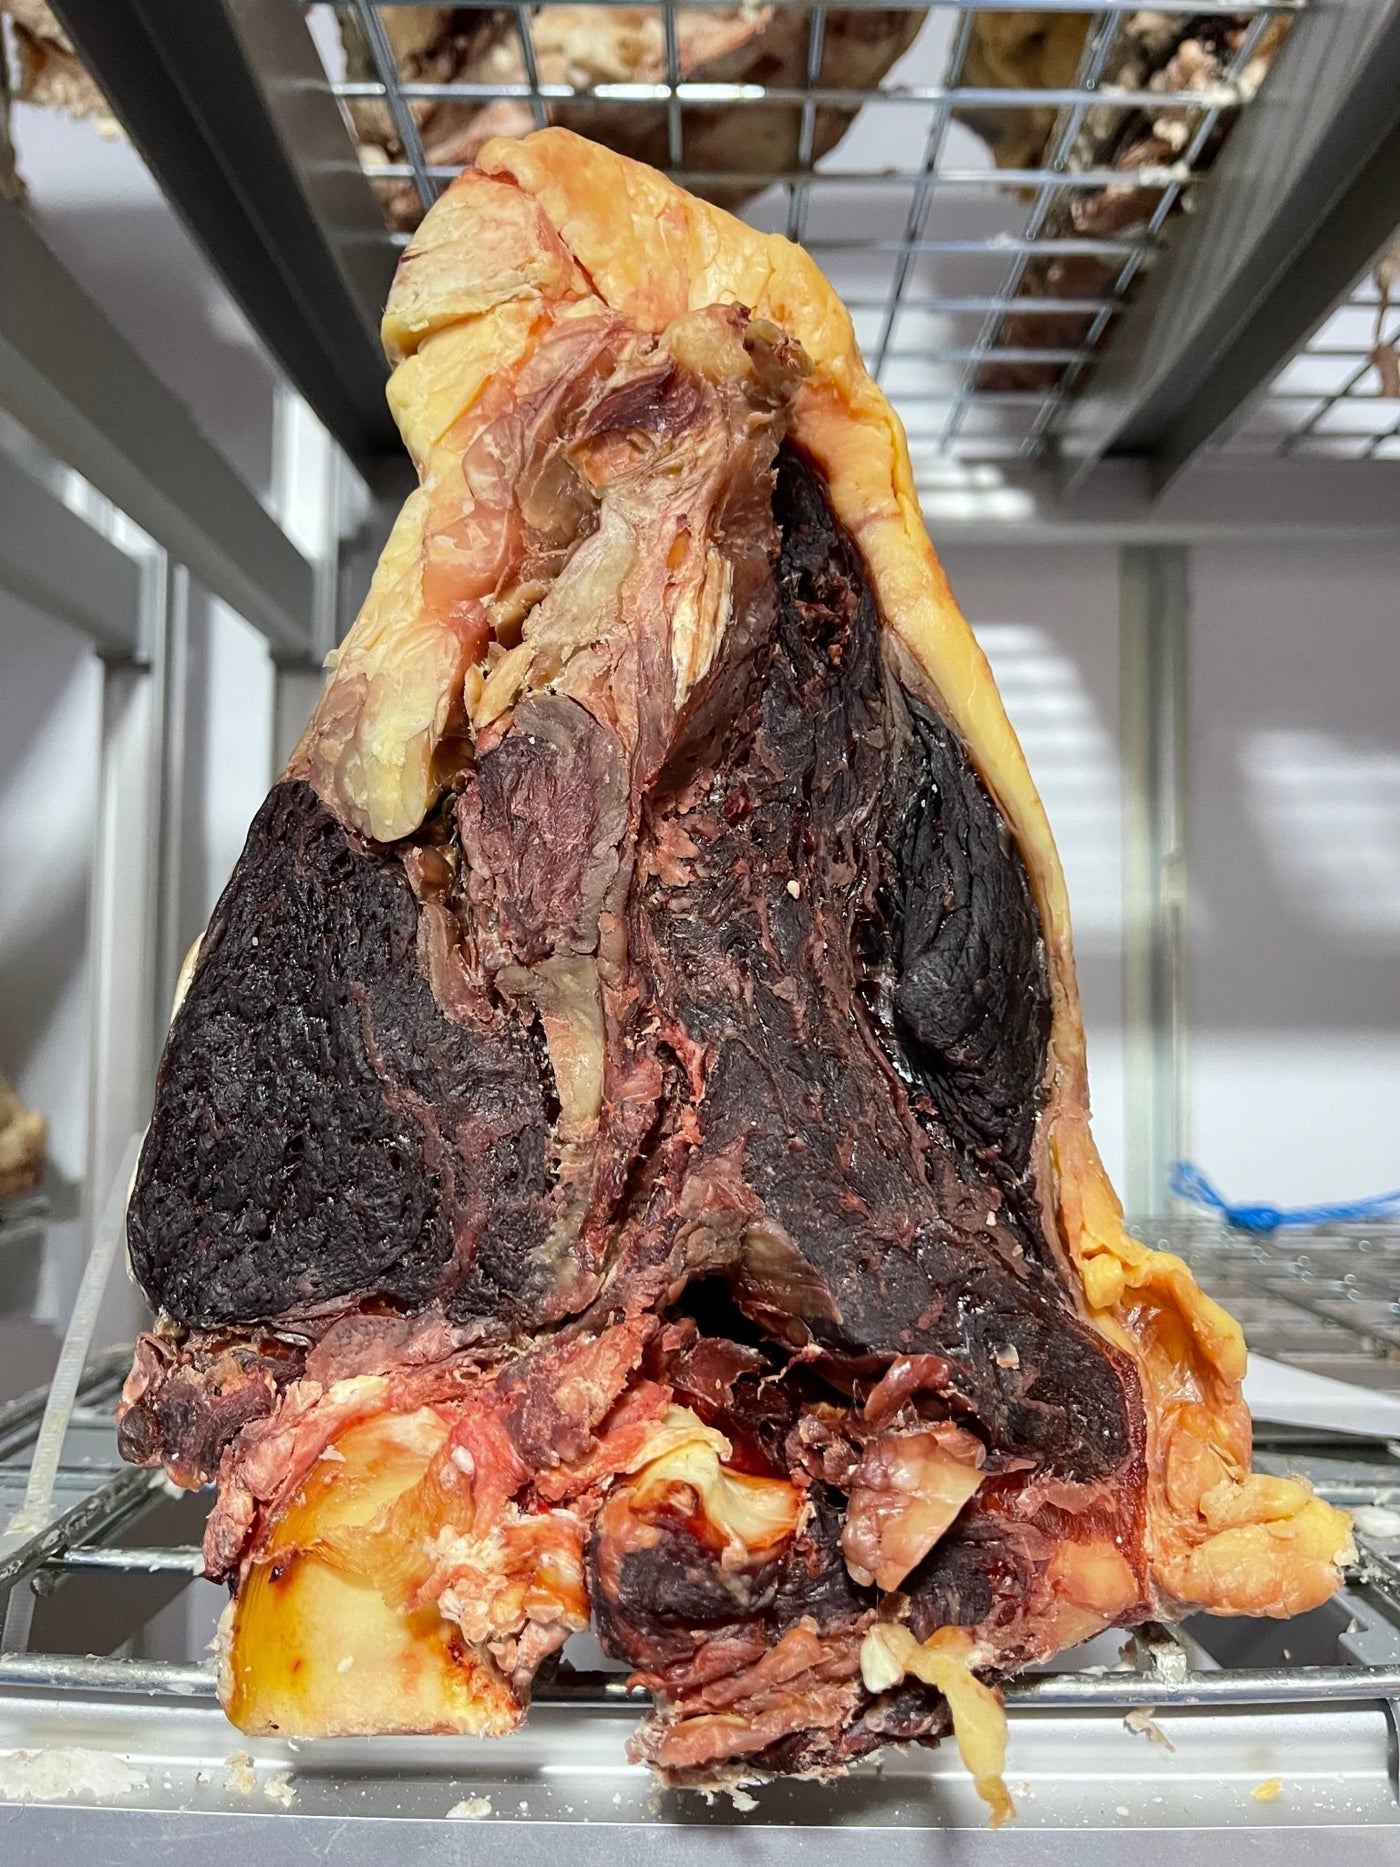 35 Day Dry-Aged Irish Angus - 5 Years Old - Thomas Joseph Butchery - Ethical Dry-Aged Meat The Best Steak UK Thomas Joseph Butchery